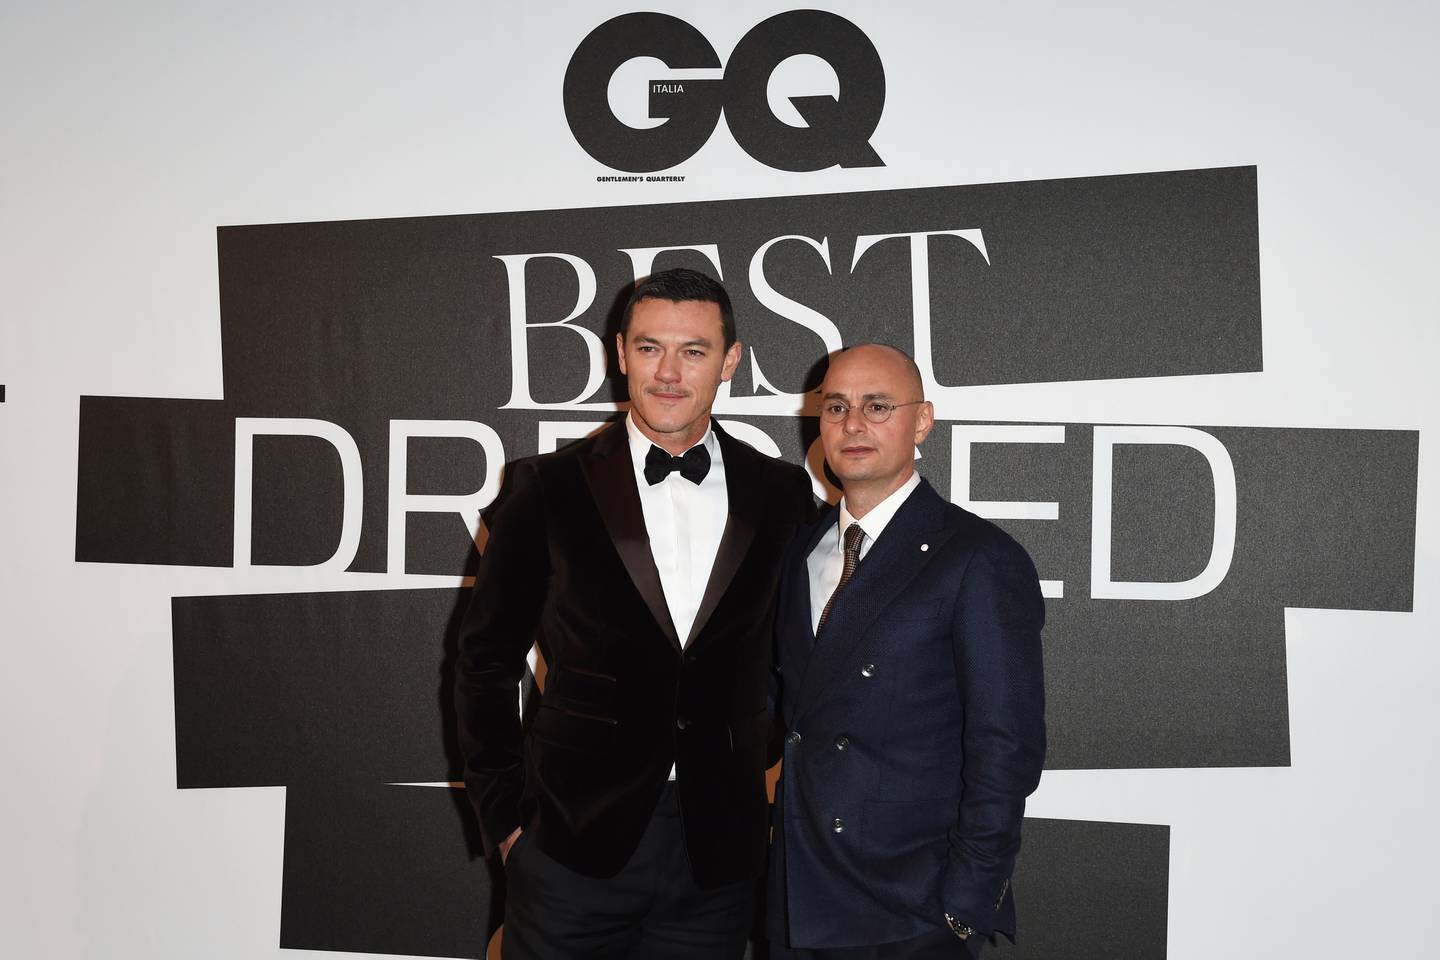 Former GQ Italia editor Giovanni Audiffredi with actor Luke Evans at a GQ event in 2019. Stefania M. D'Alessandro/Getty Images